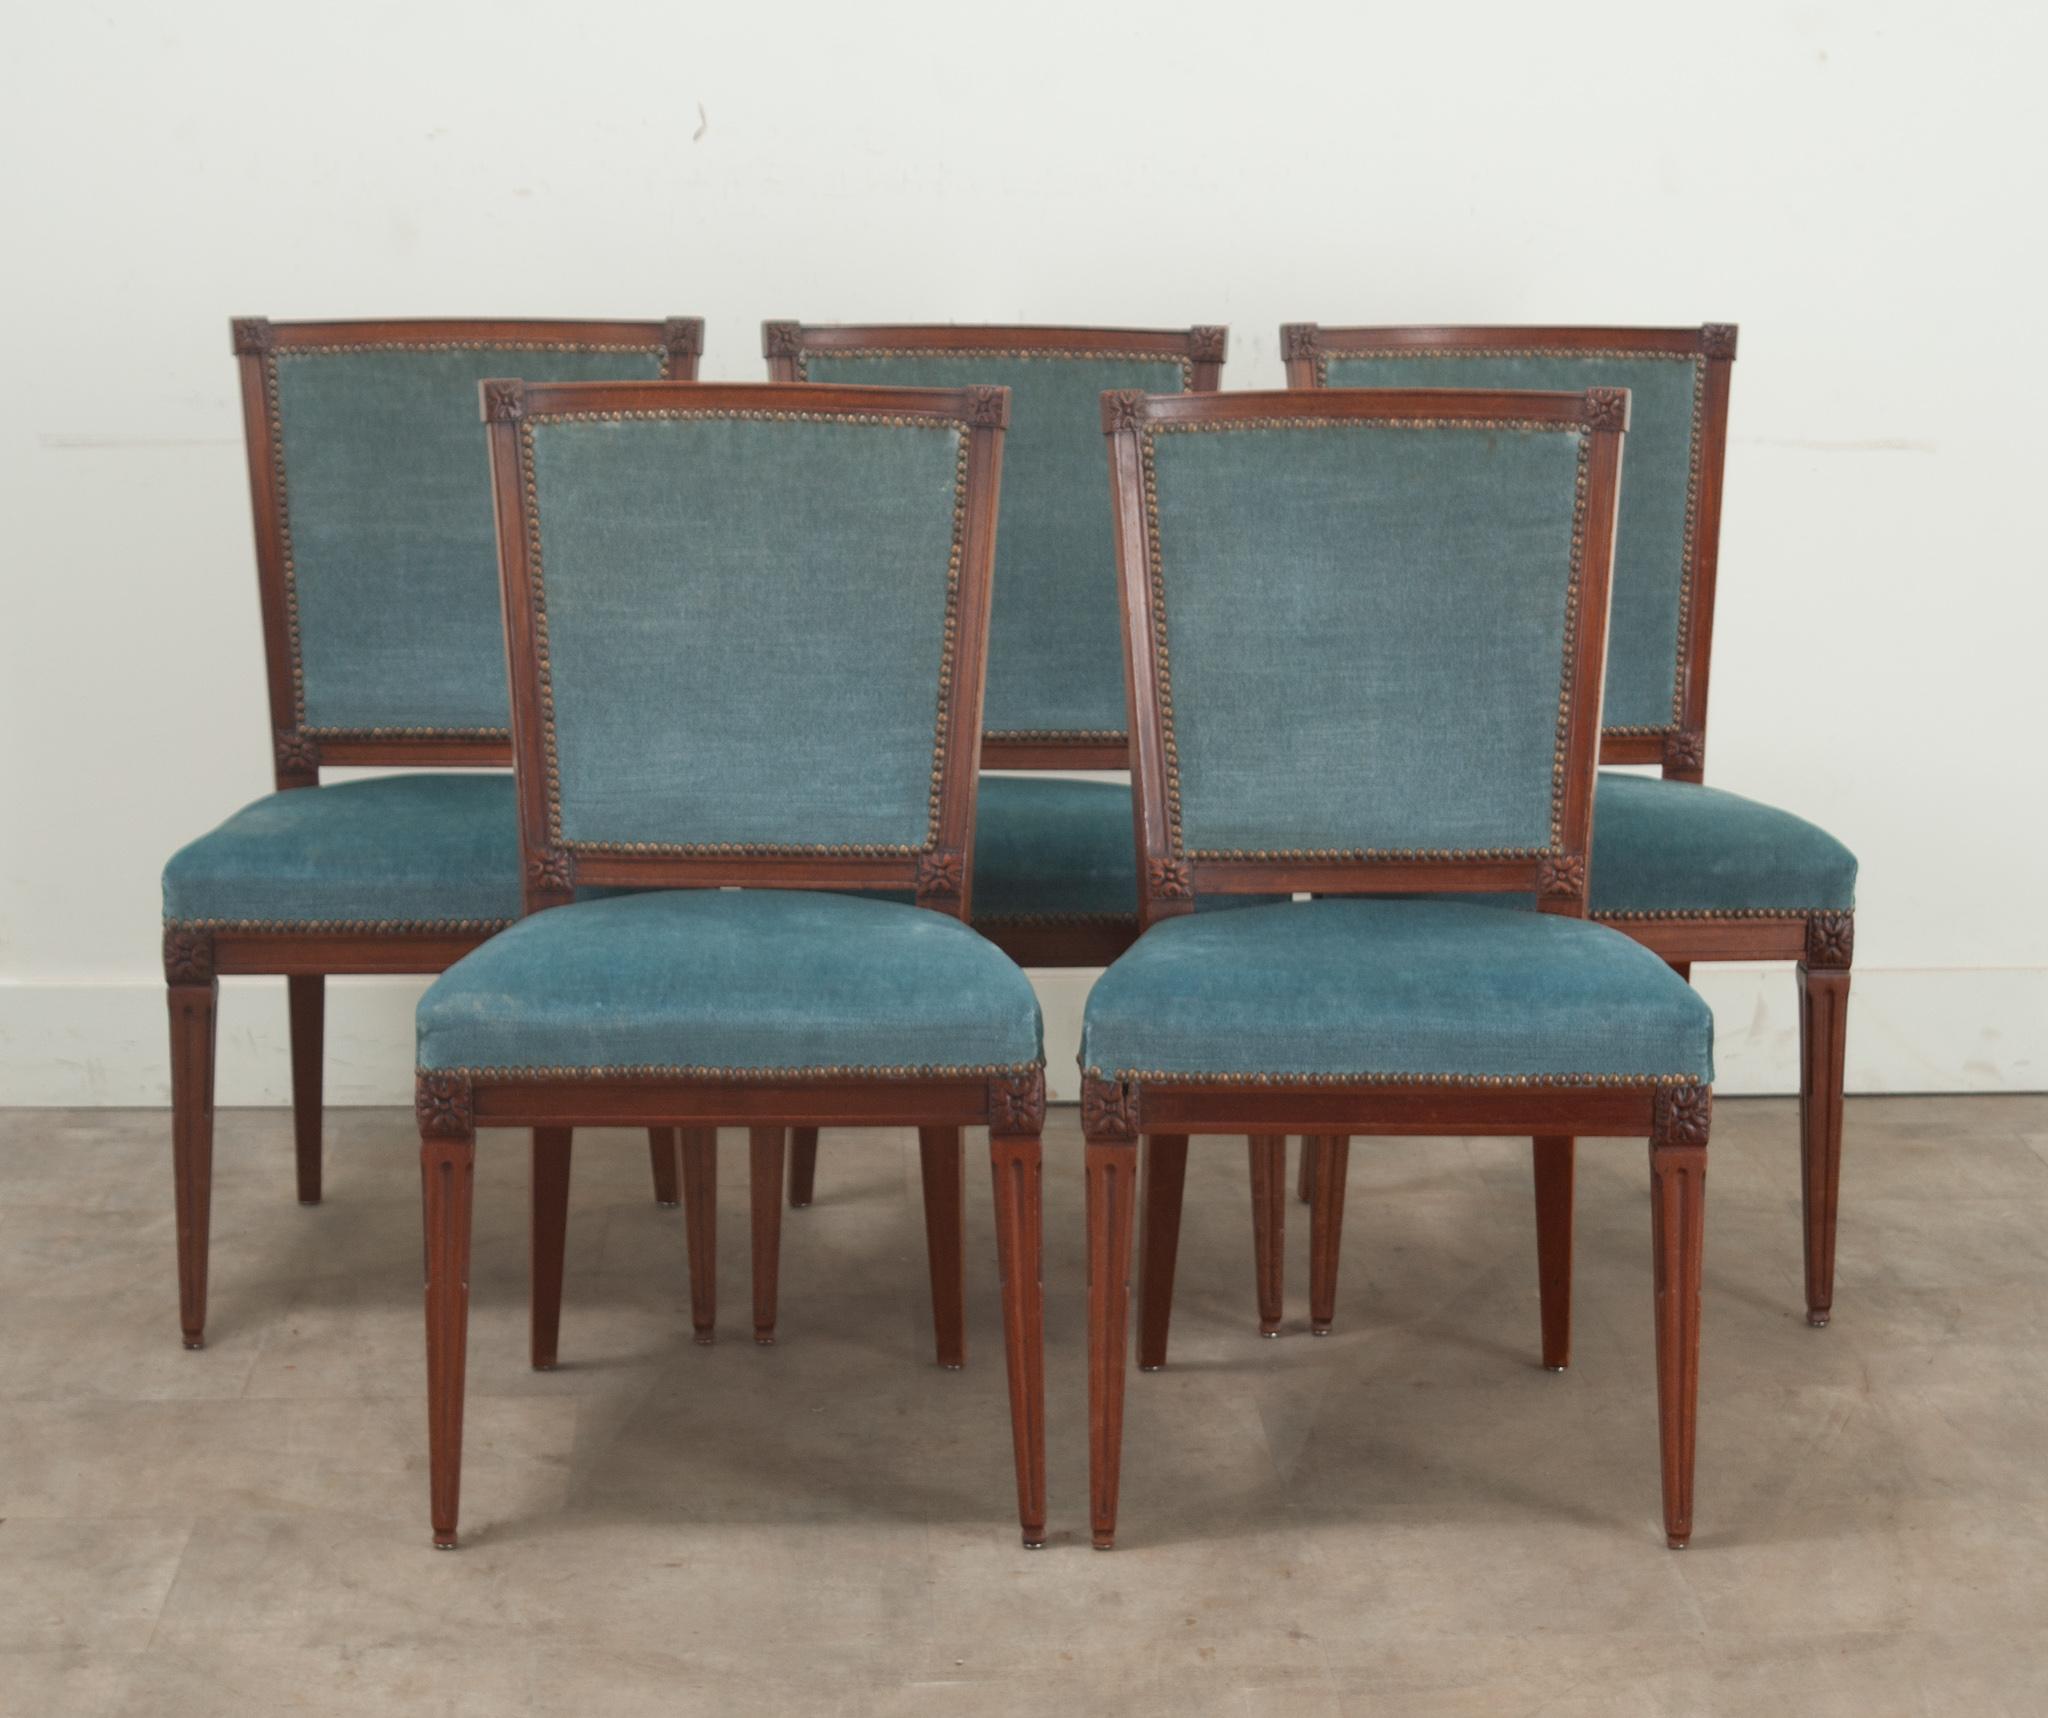 A classically designed set of Louis XVI style dining chairs from France. The oak frames feature rosette carvings on the back and seat corners and brass nailheads keep the gently used blue mohair fabric upholstery in place. The comfortable chairs are